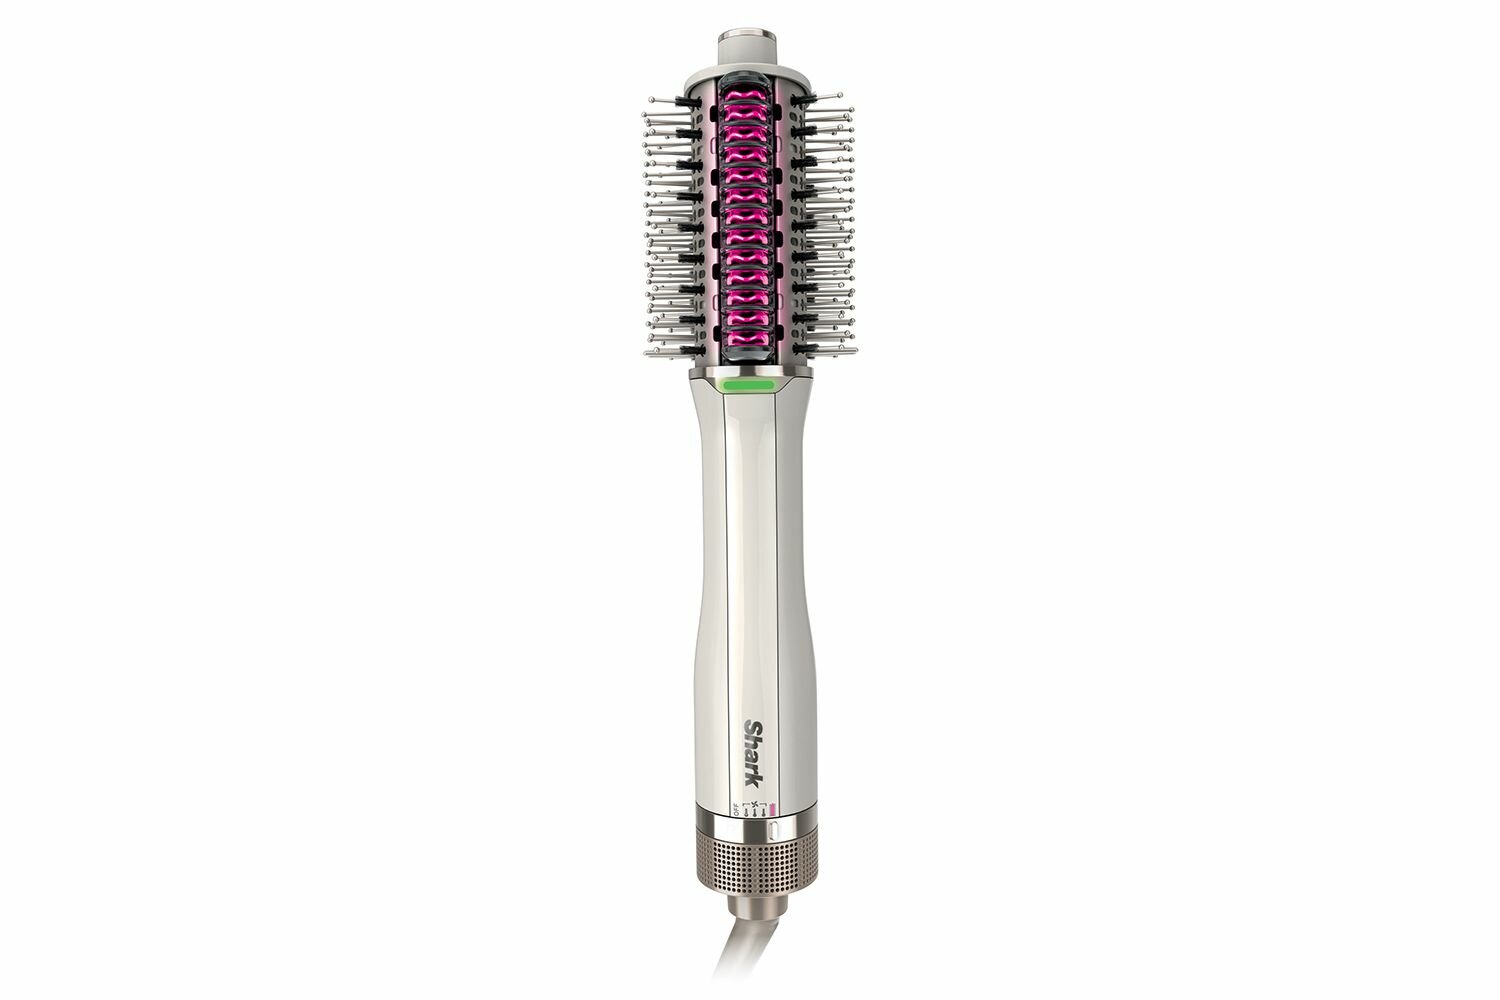 SHARK SmoothStyle Heated Comb & Blow Dryer Brush